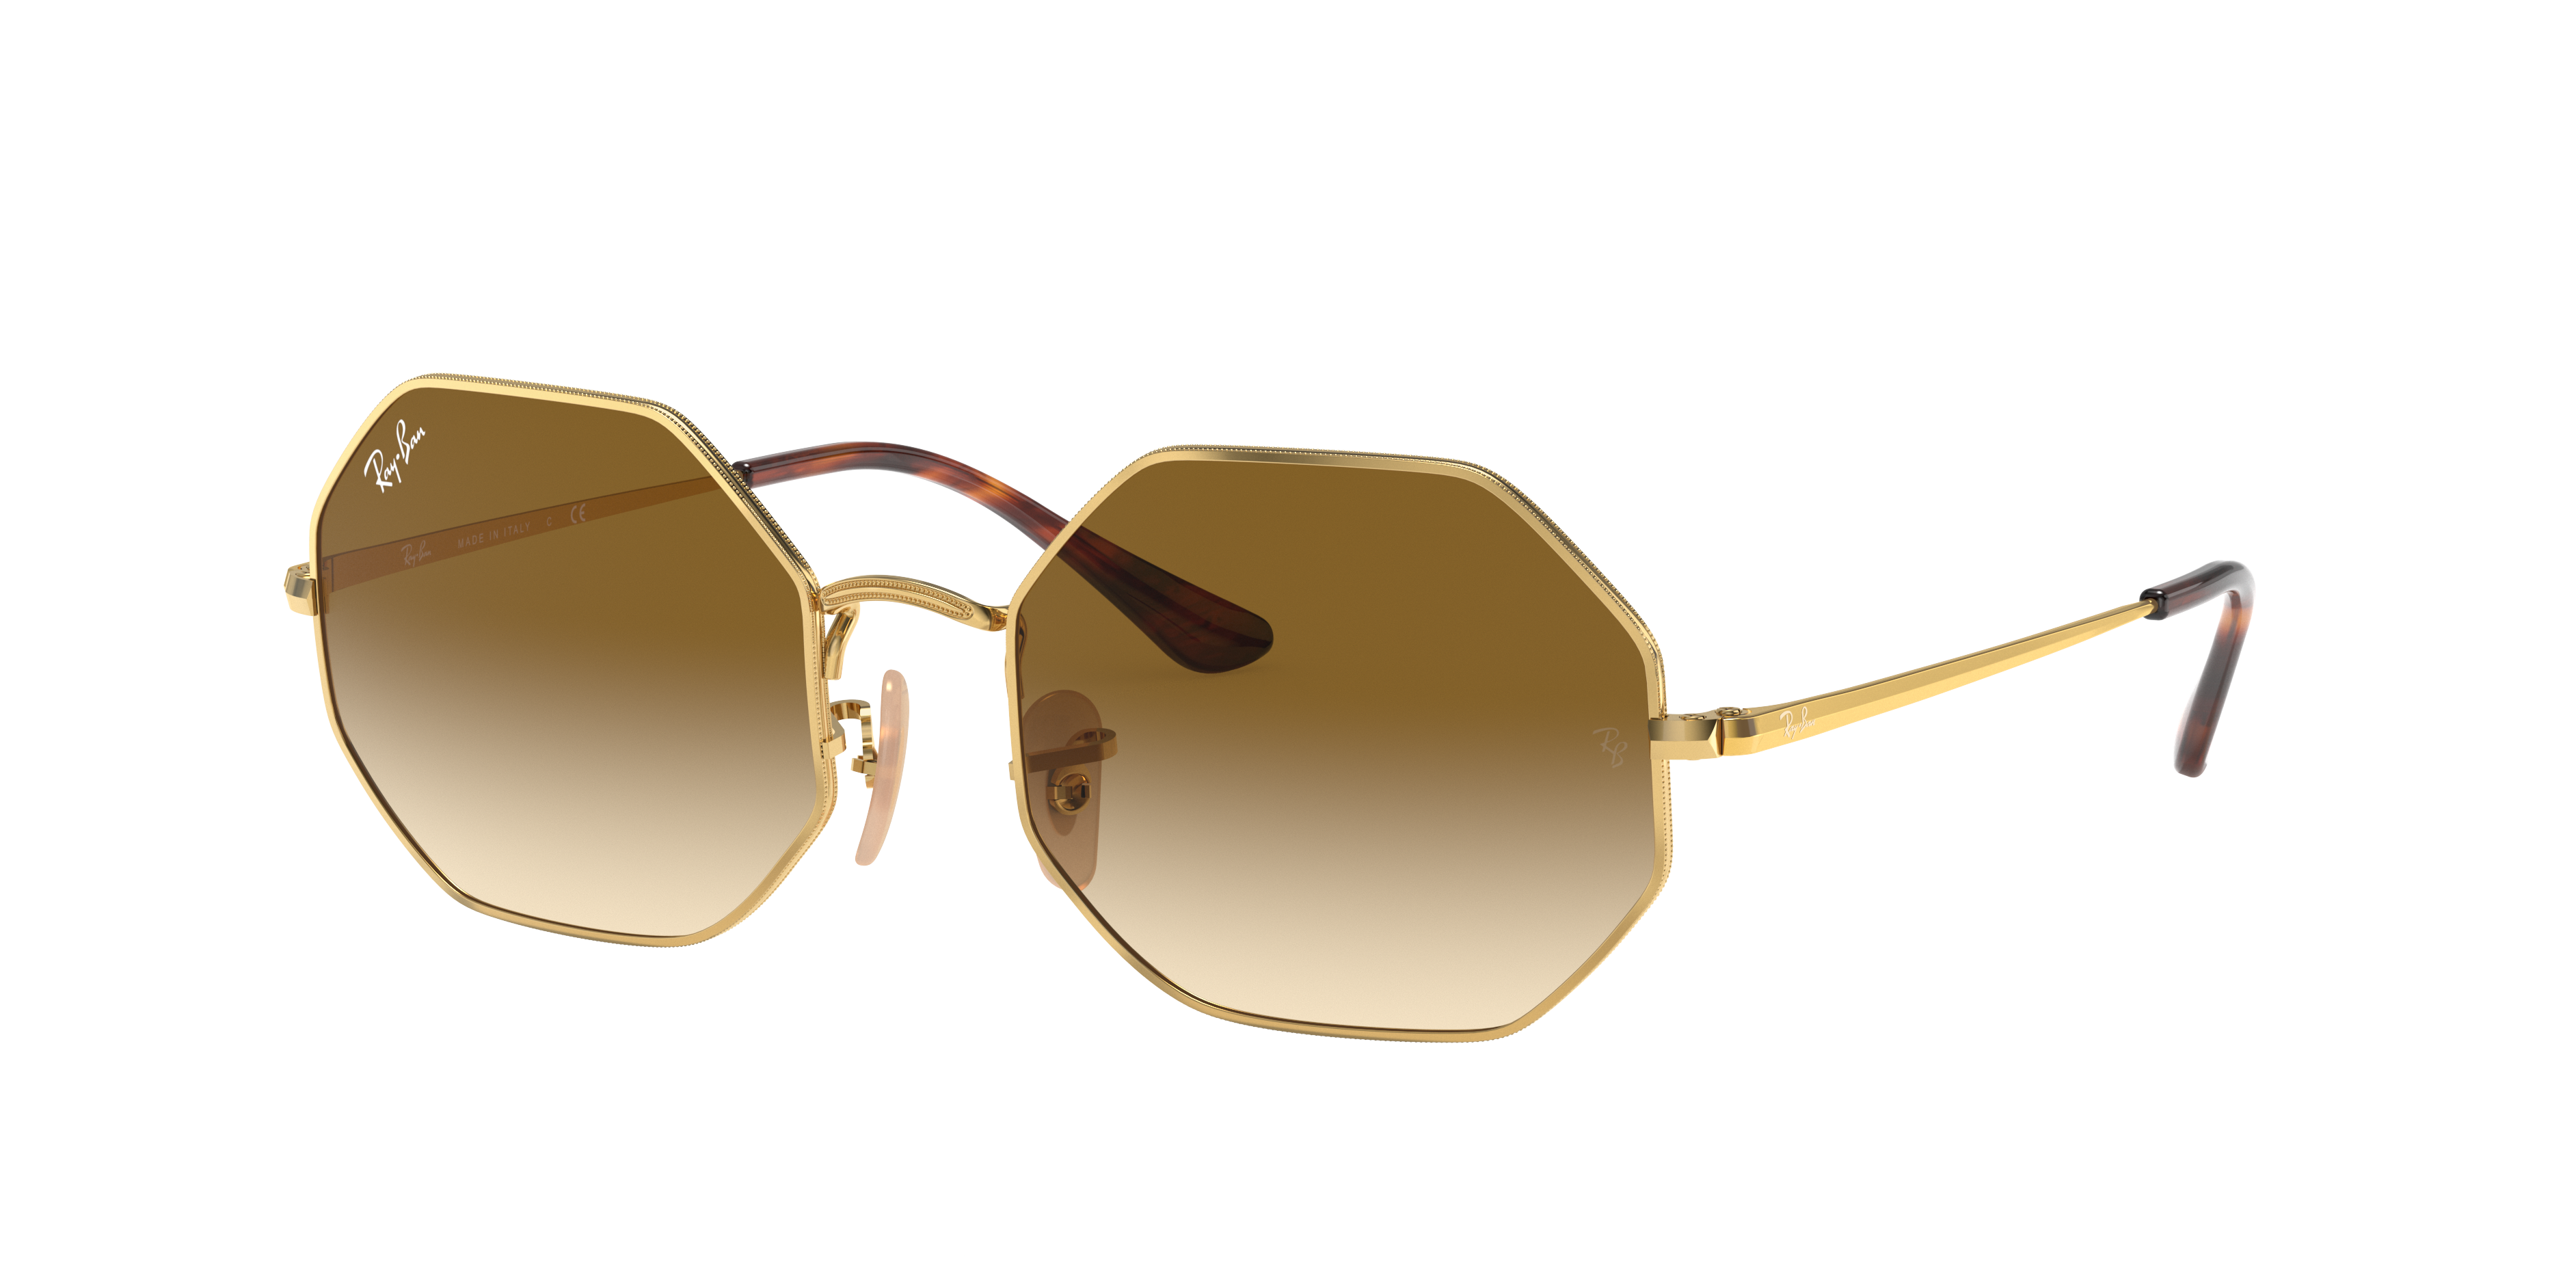 Octagon 1972 Sunglasses in Gold and Light Brown | Ray-Ban®